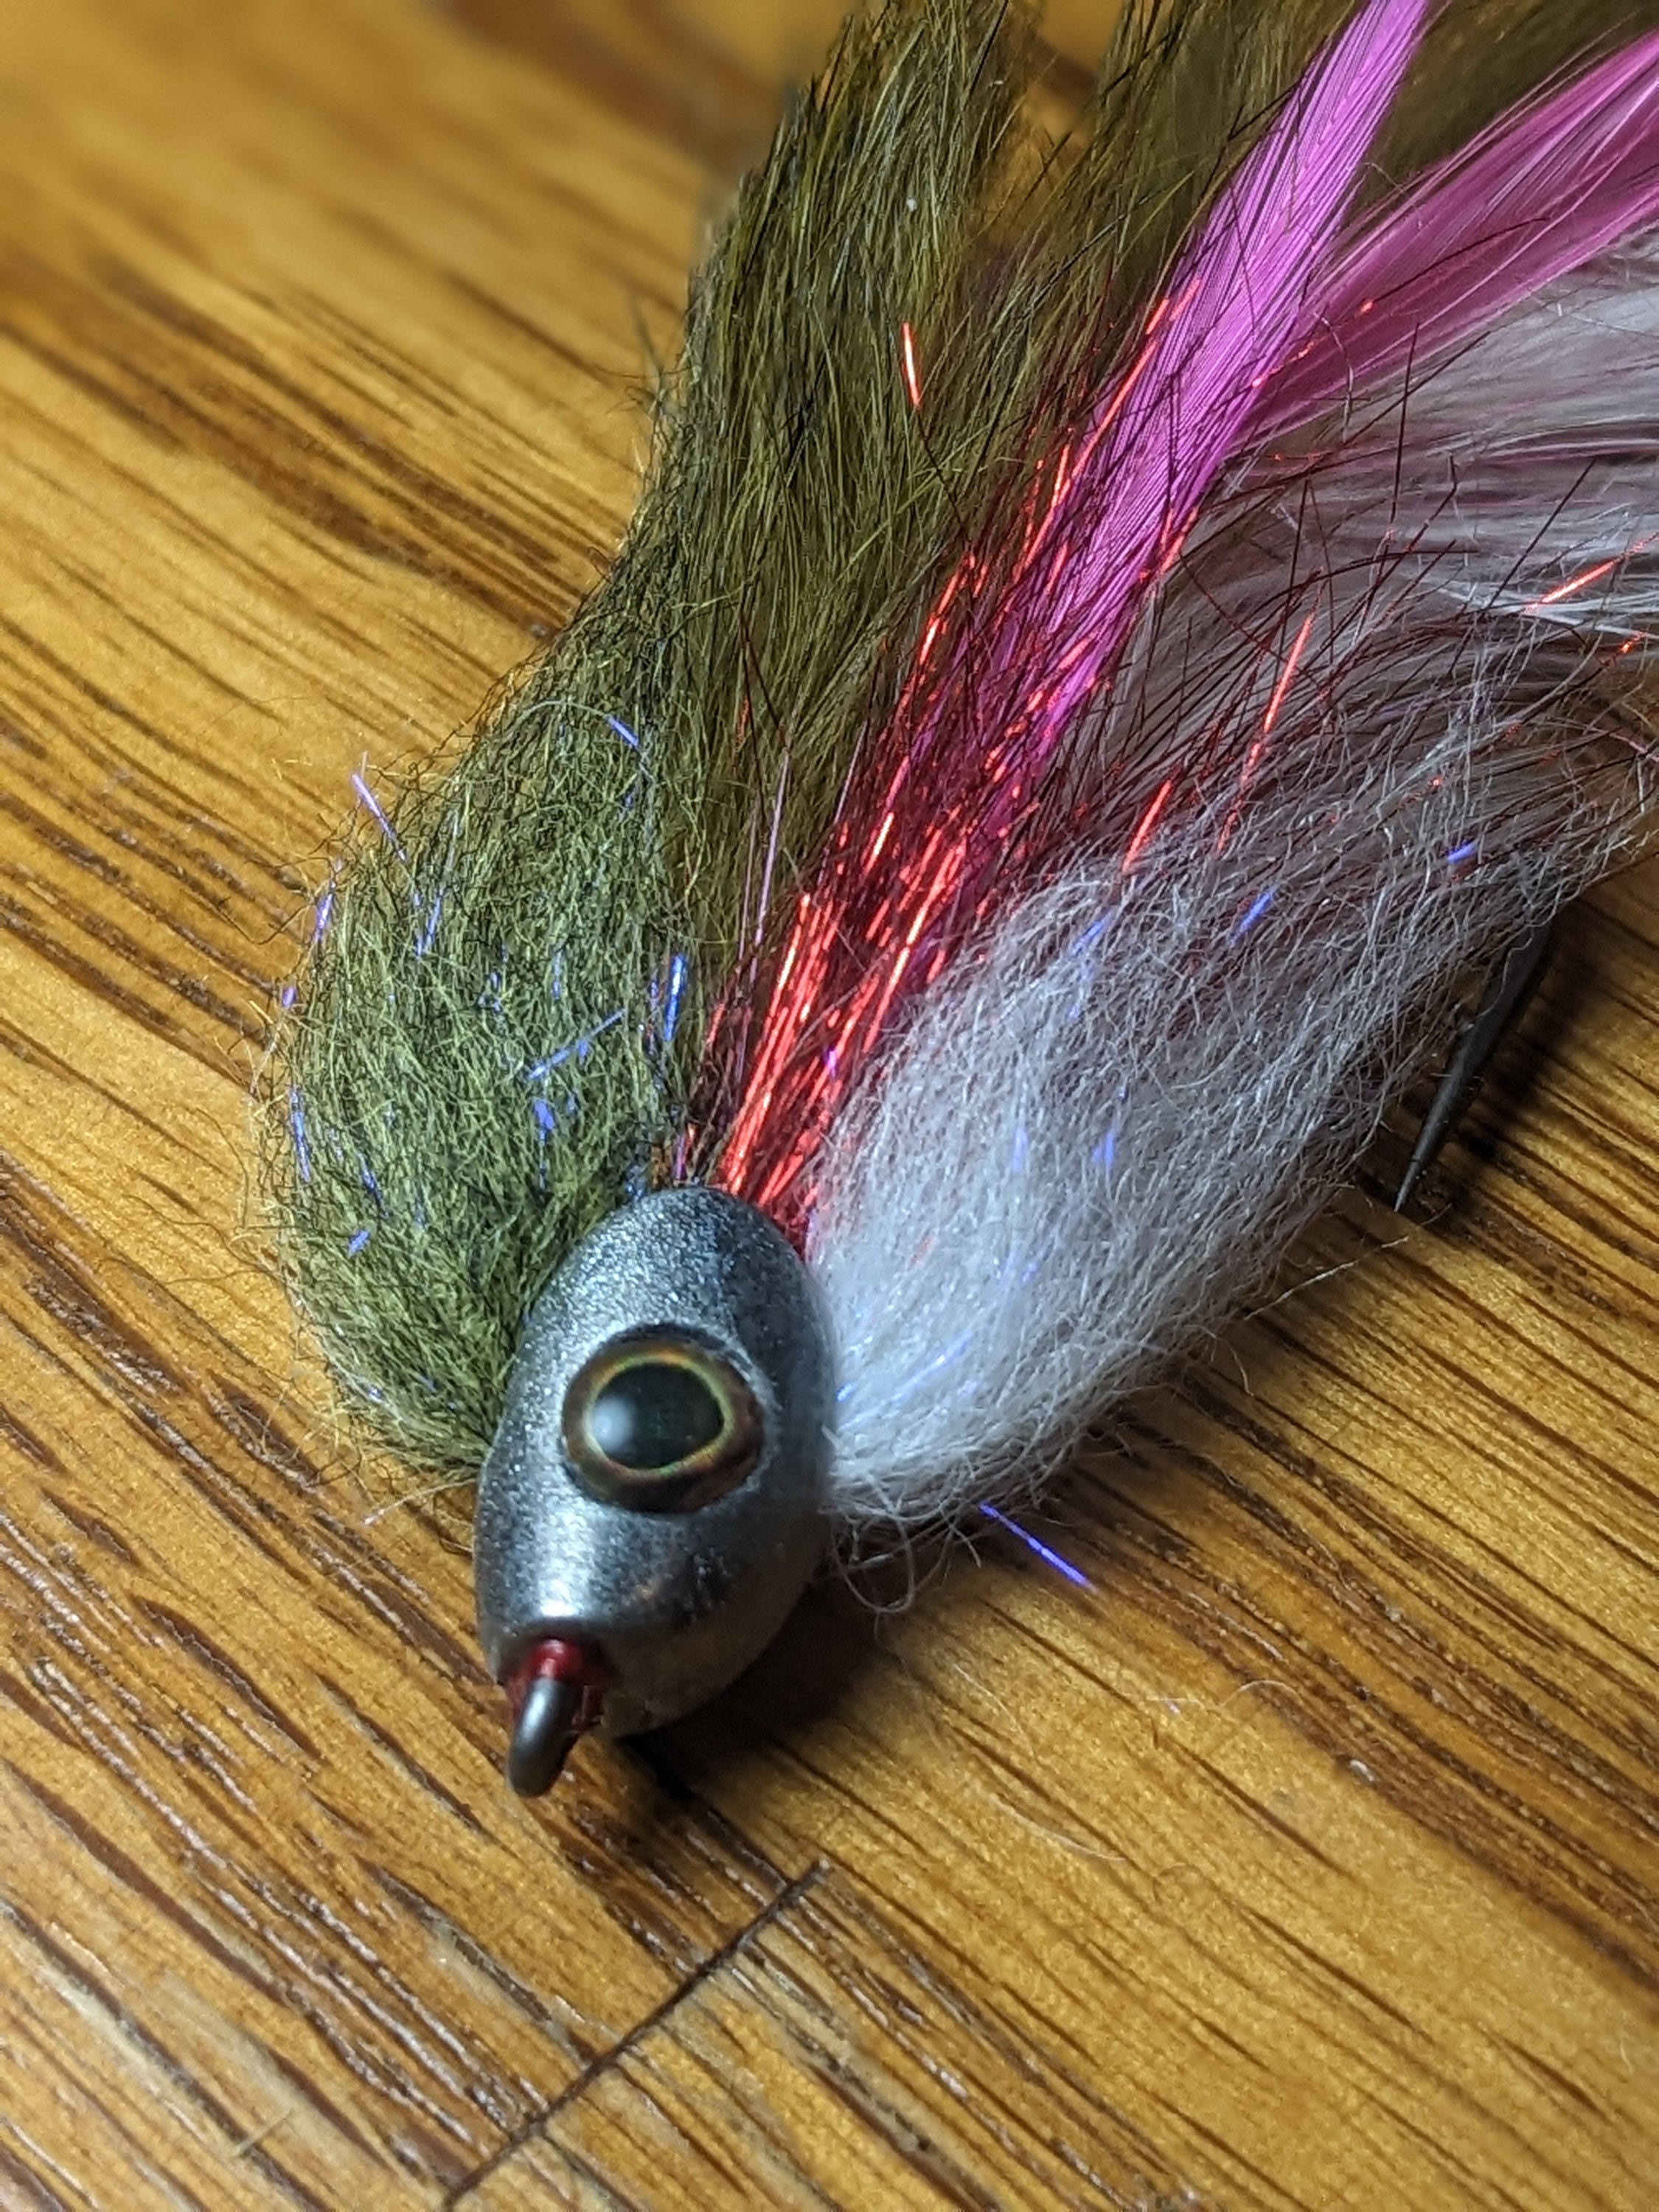 Juvenile Trout Fly Fishing or Spin Rod Lure by Dropjaw Flies 